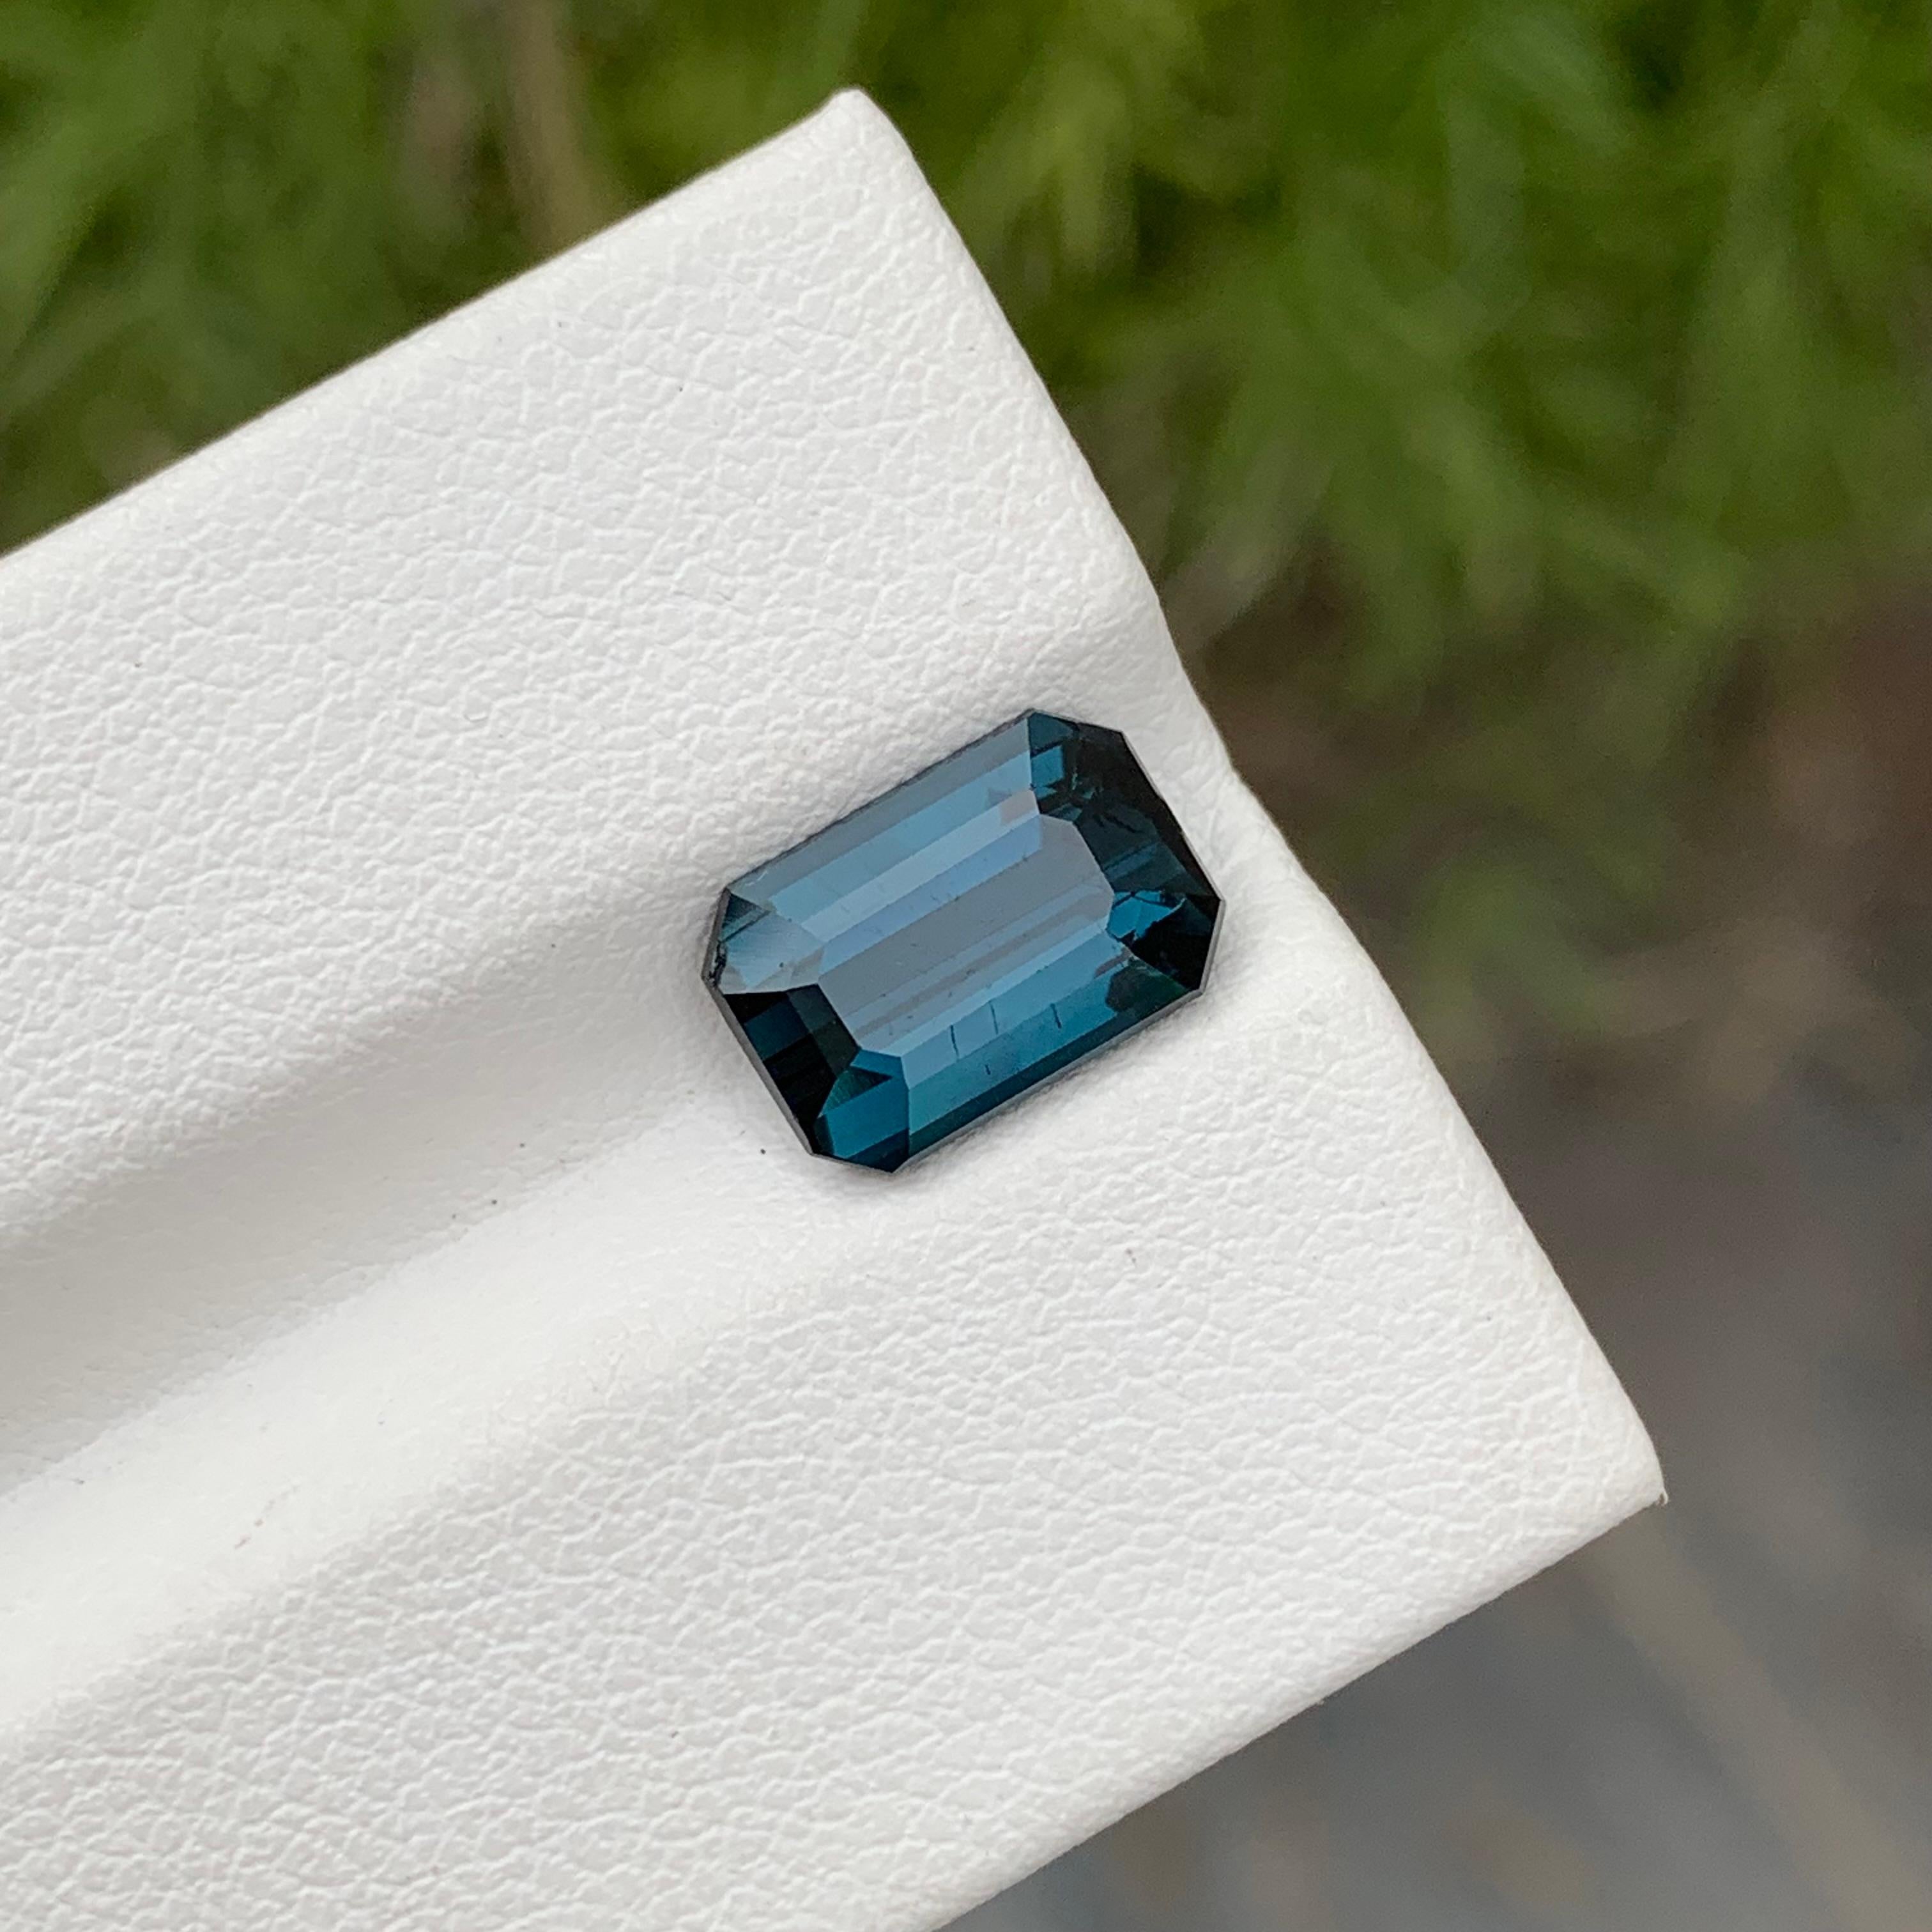 Loose Indicolite Tourmaline
Weight: 3.10 Carats
Dimension: 10.3 x 7 x 5 Mm
Colour: Blue
Origin: Afghanistan
Treatment: Non
Certificate: On Demand

Indicolite tourmaline, prized for its stunning blue hues ranging from serene sky blues to deep oceanic